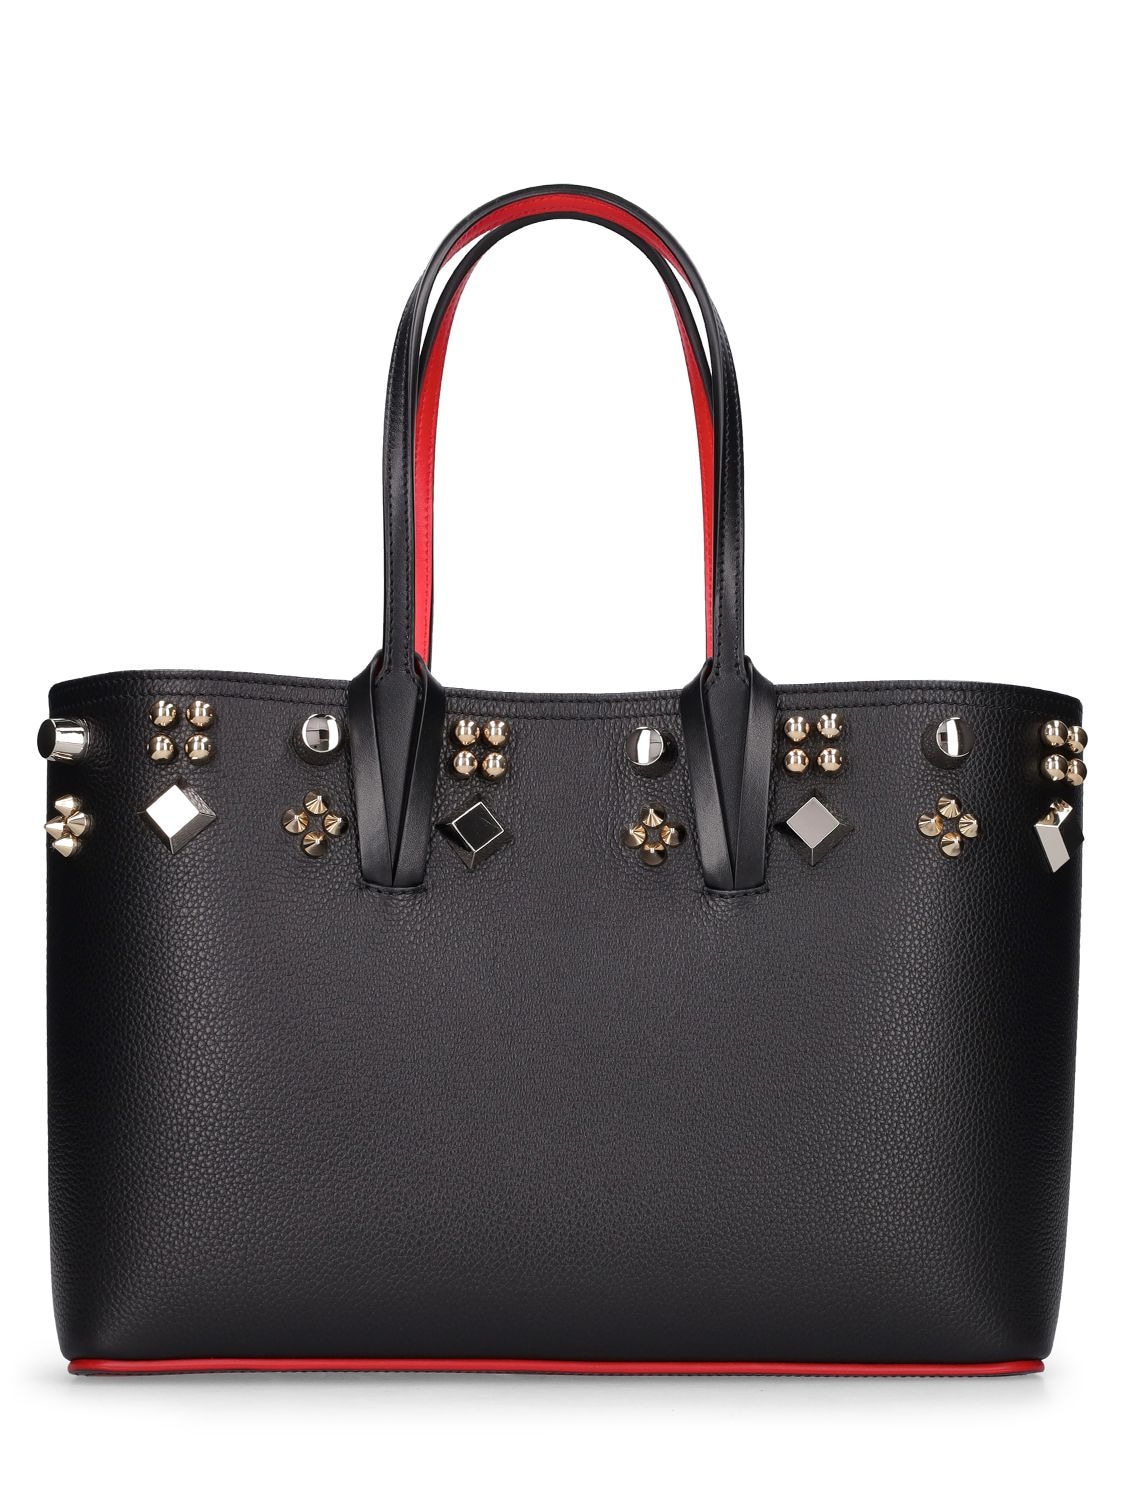 Image of Small Cabata Spiked Leather Tote Bag